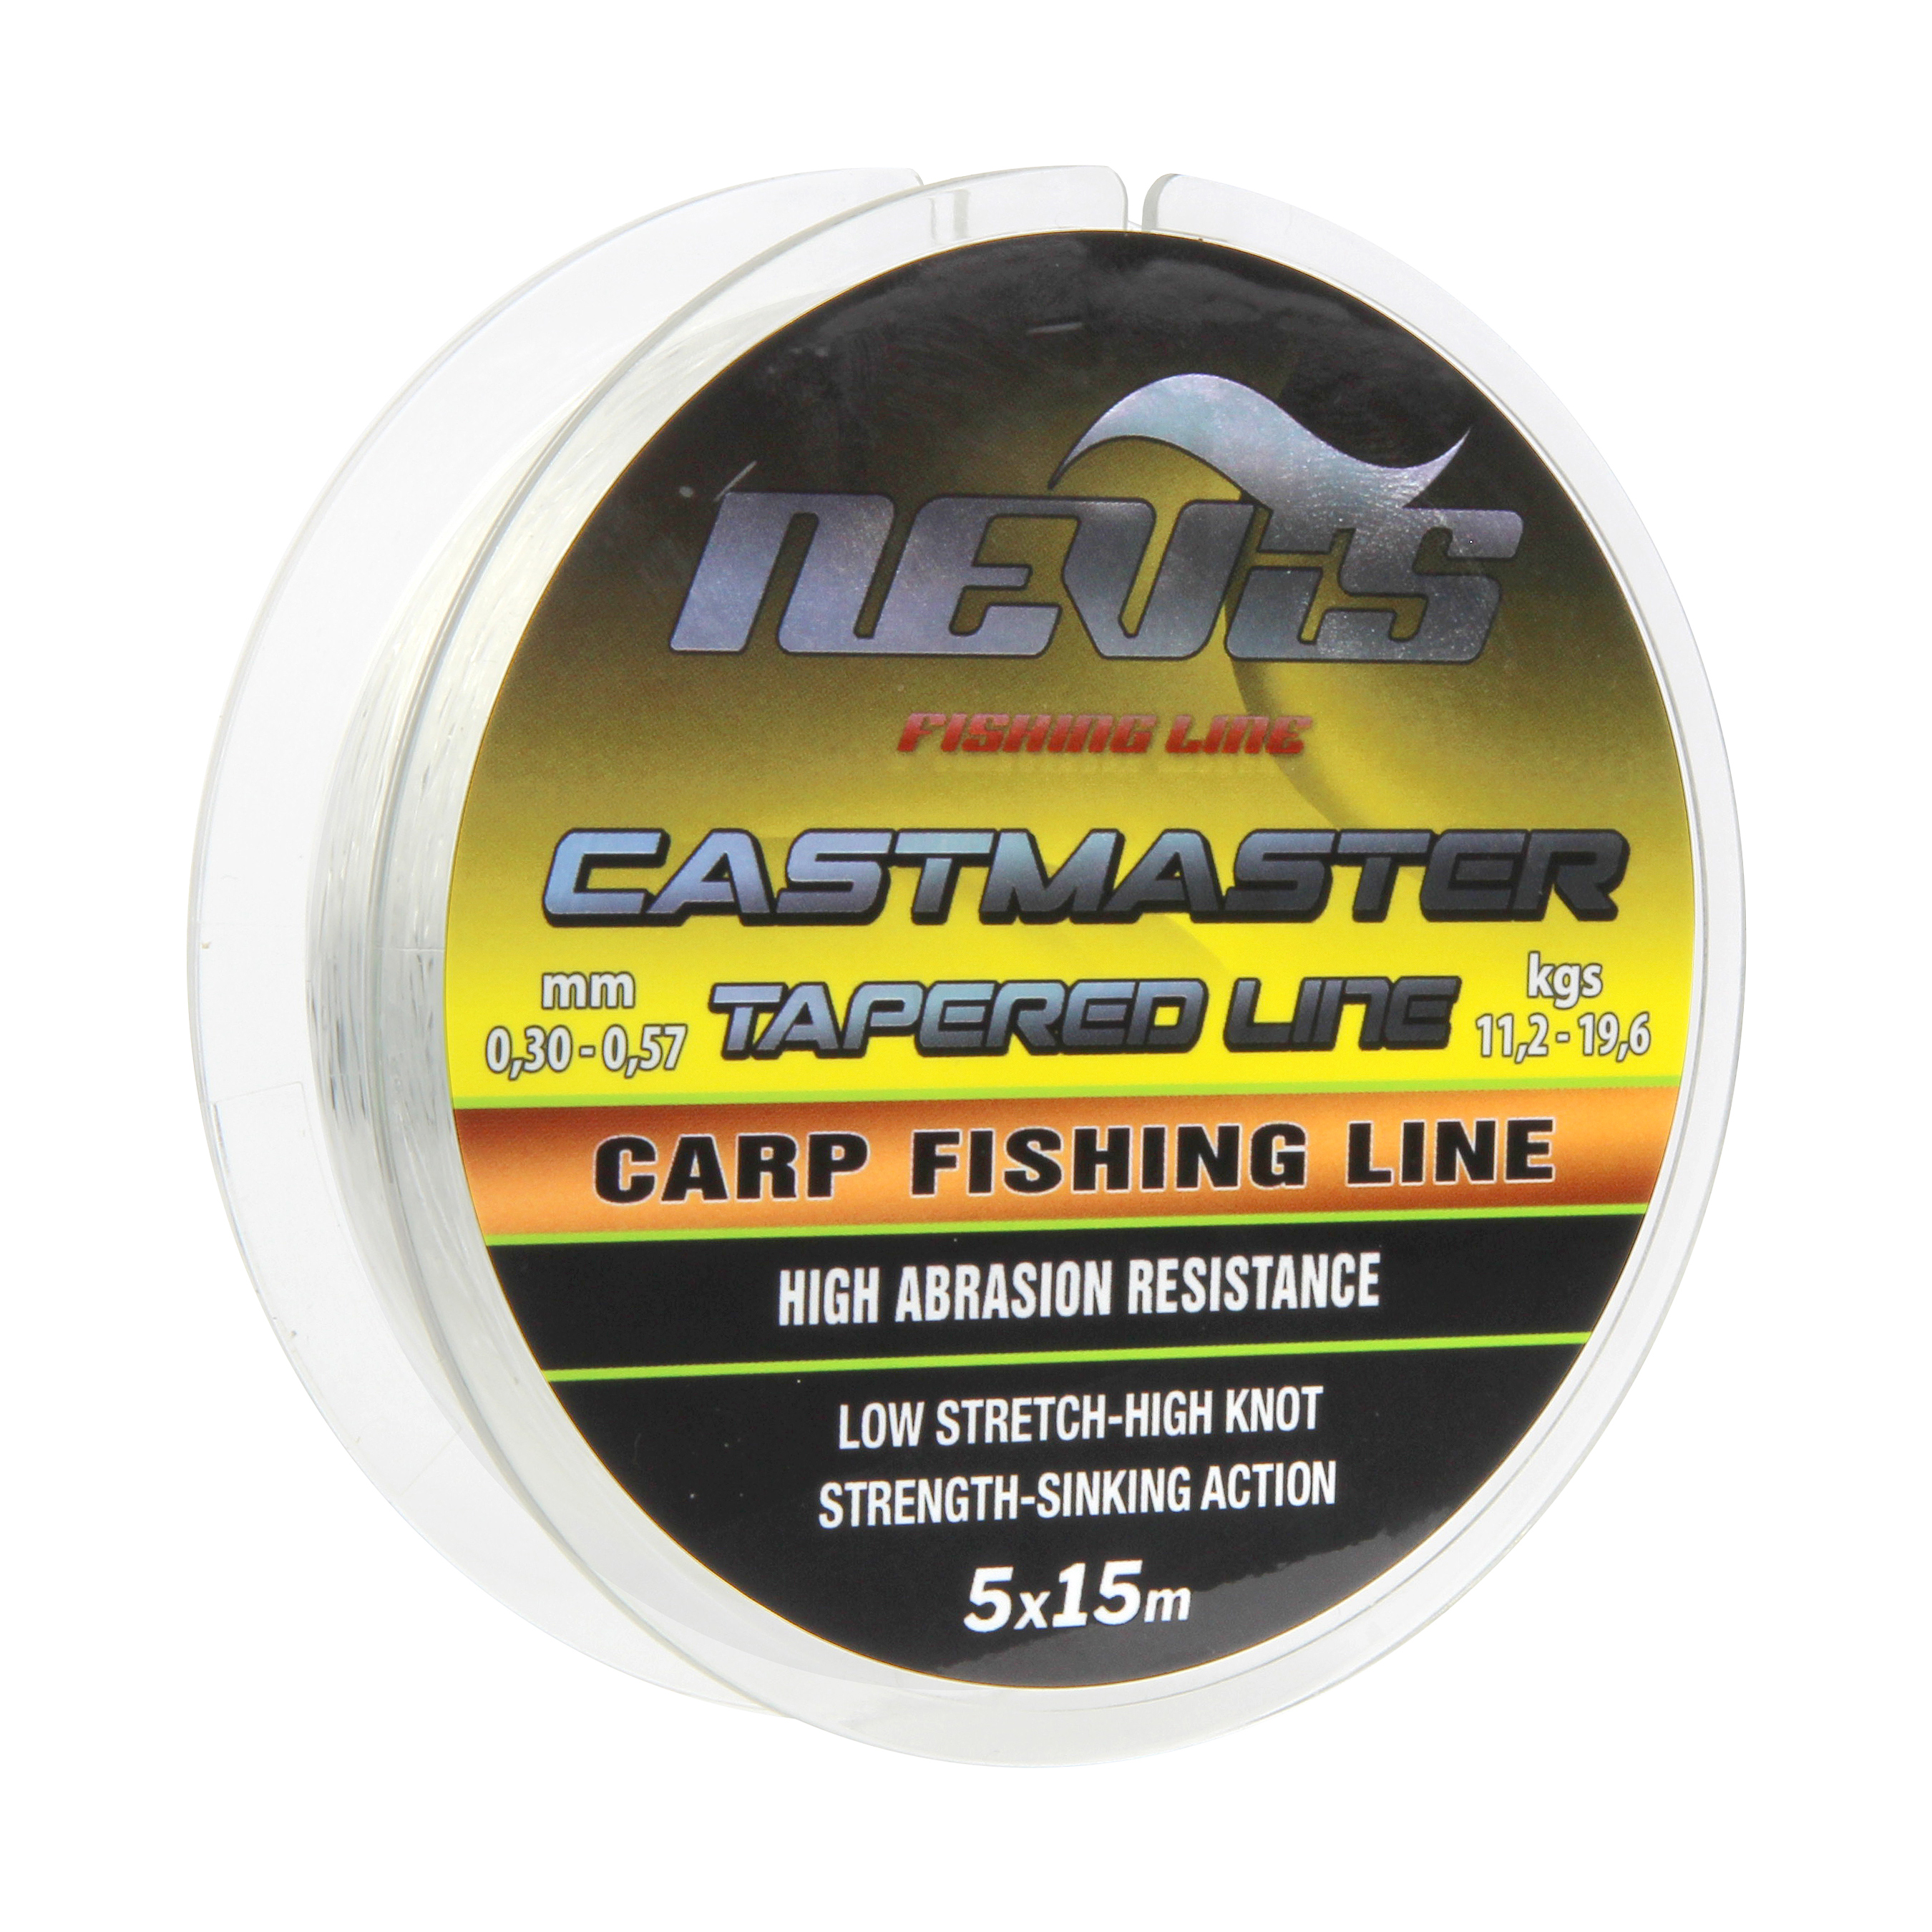 Castmaster Tapered Line 5x15m  0.28-0.57mm